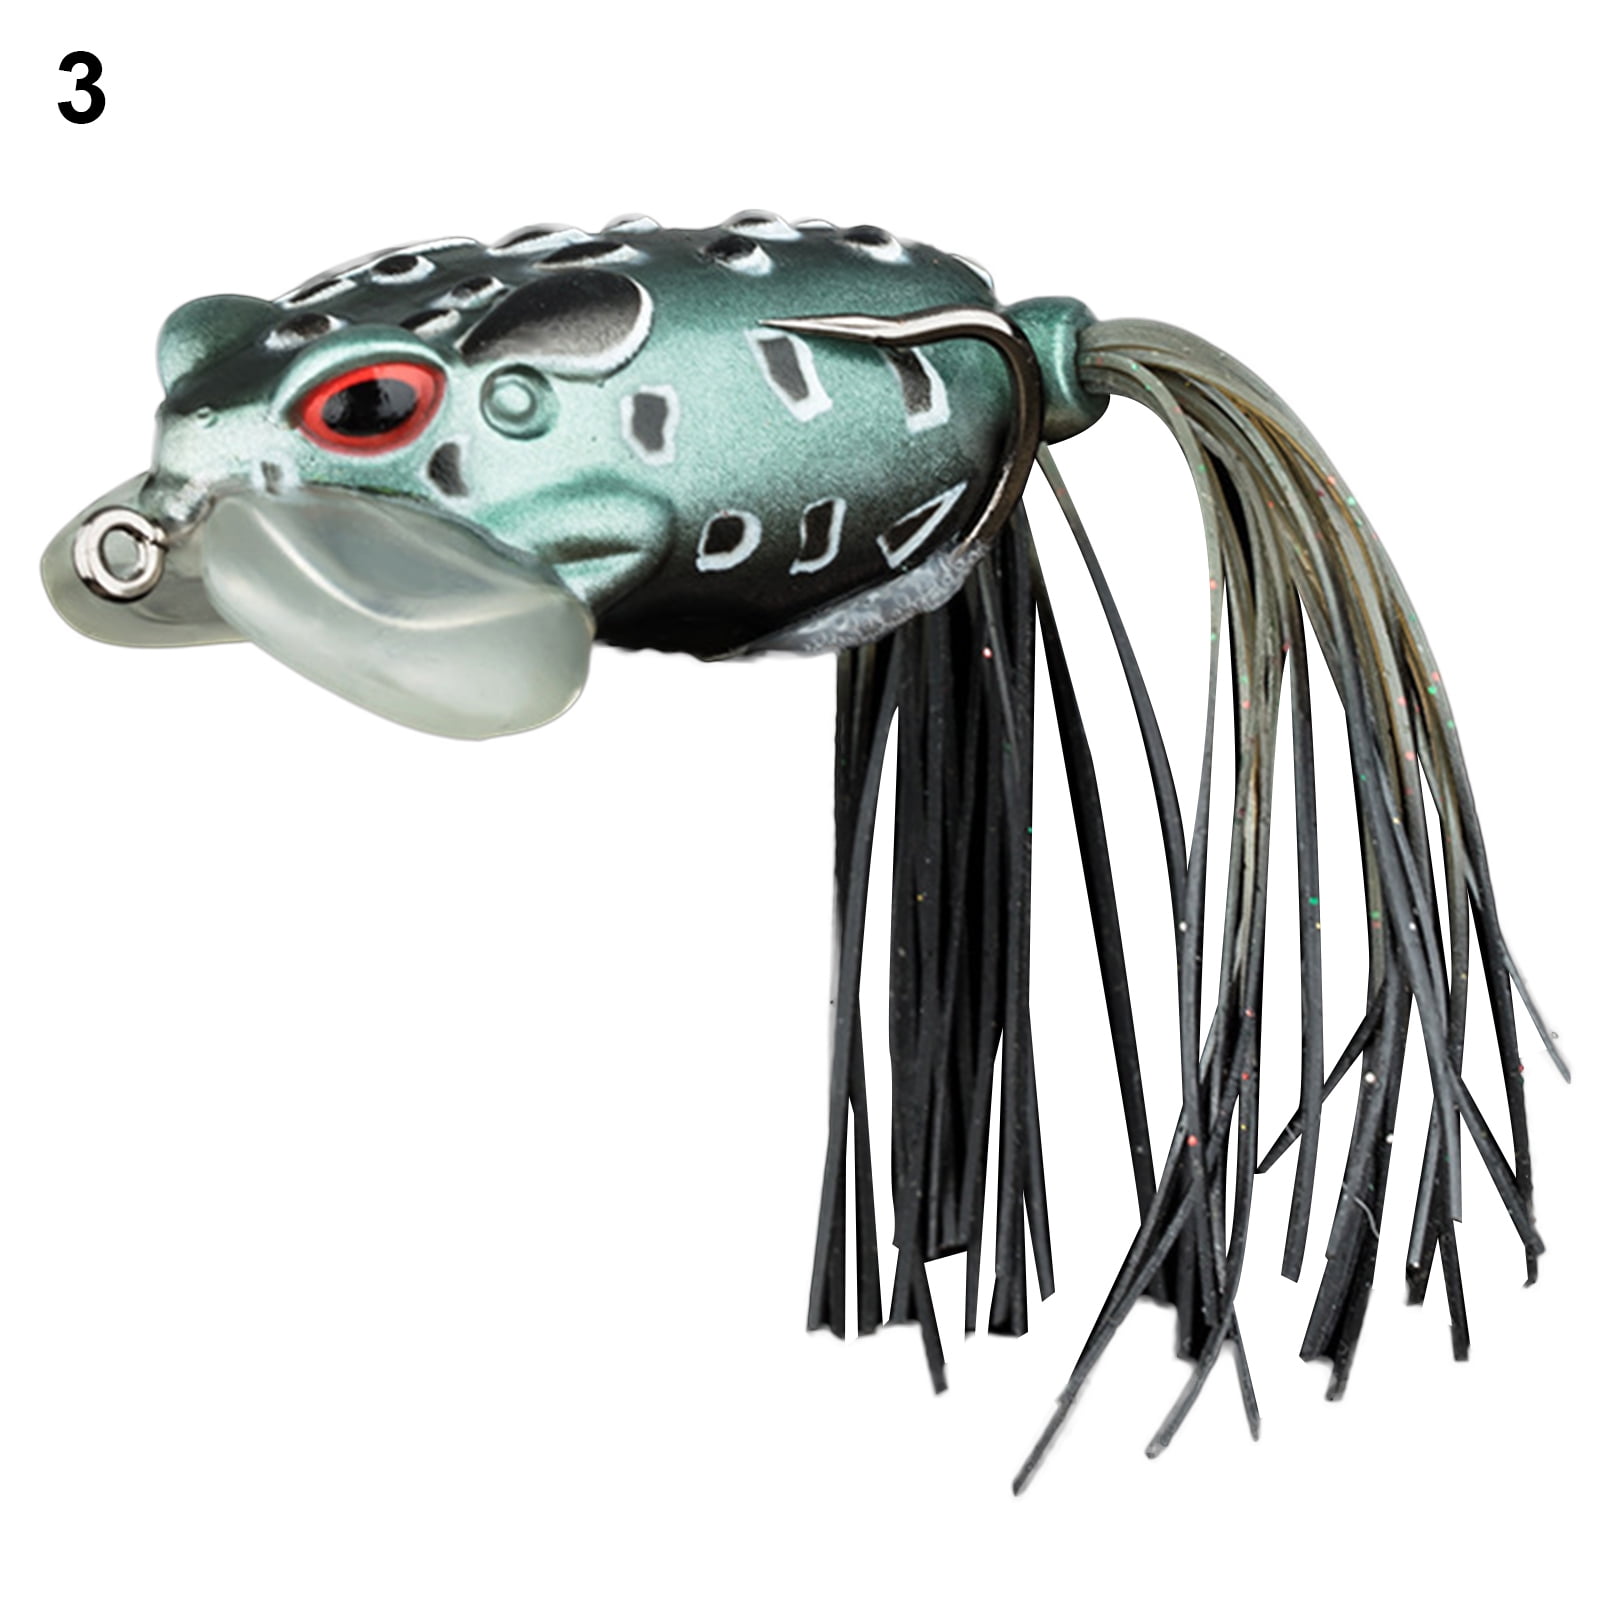 7cm 14G Frog Lure, Soft Lure, Fishing Lure, Rubber Lure, Frog Bait